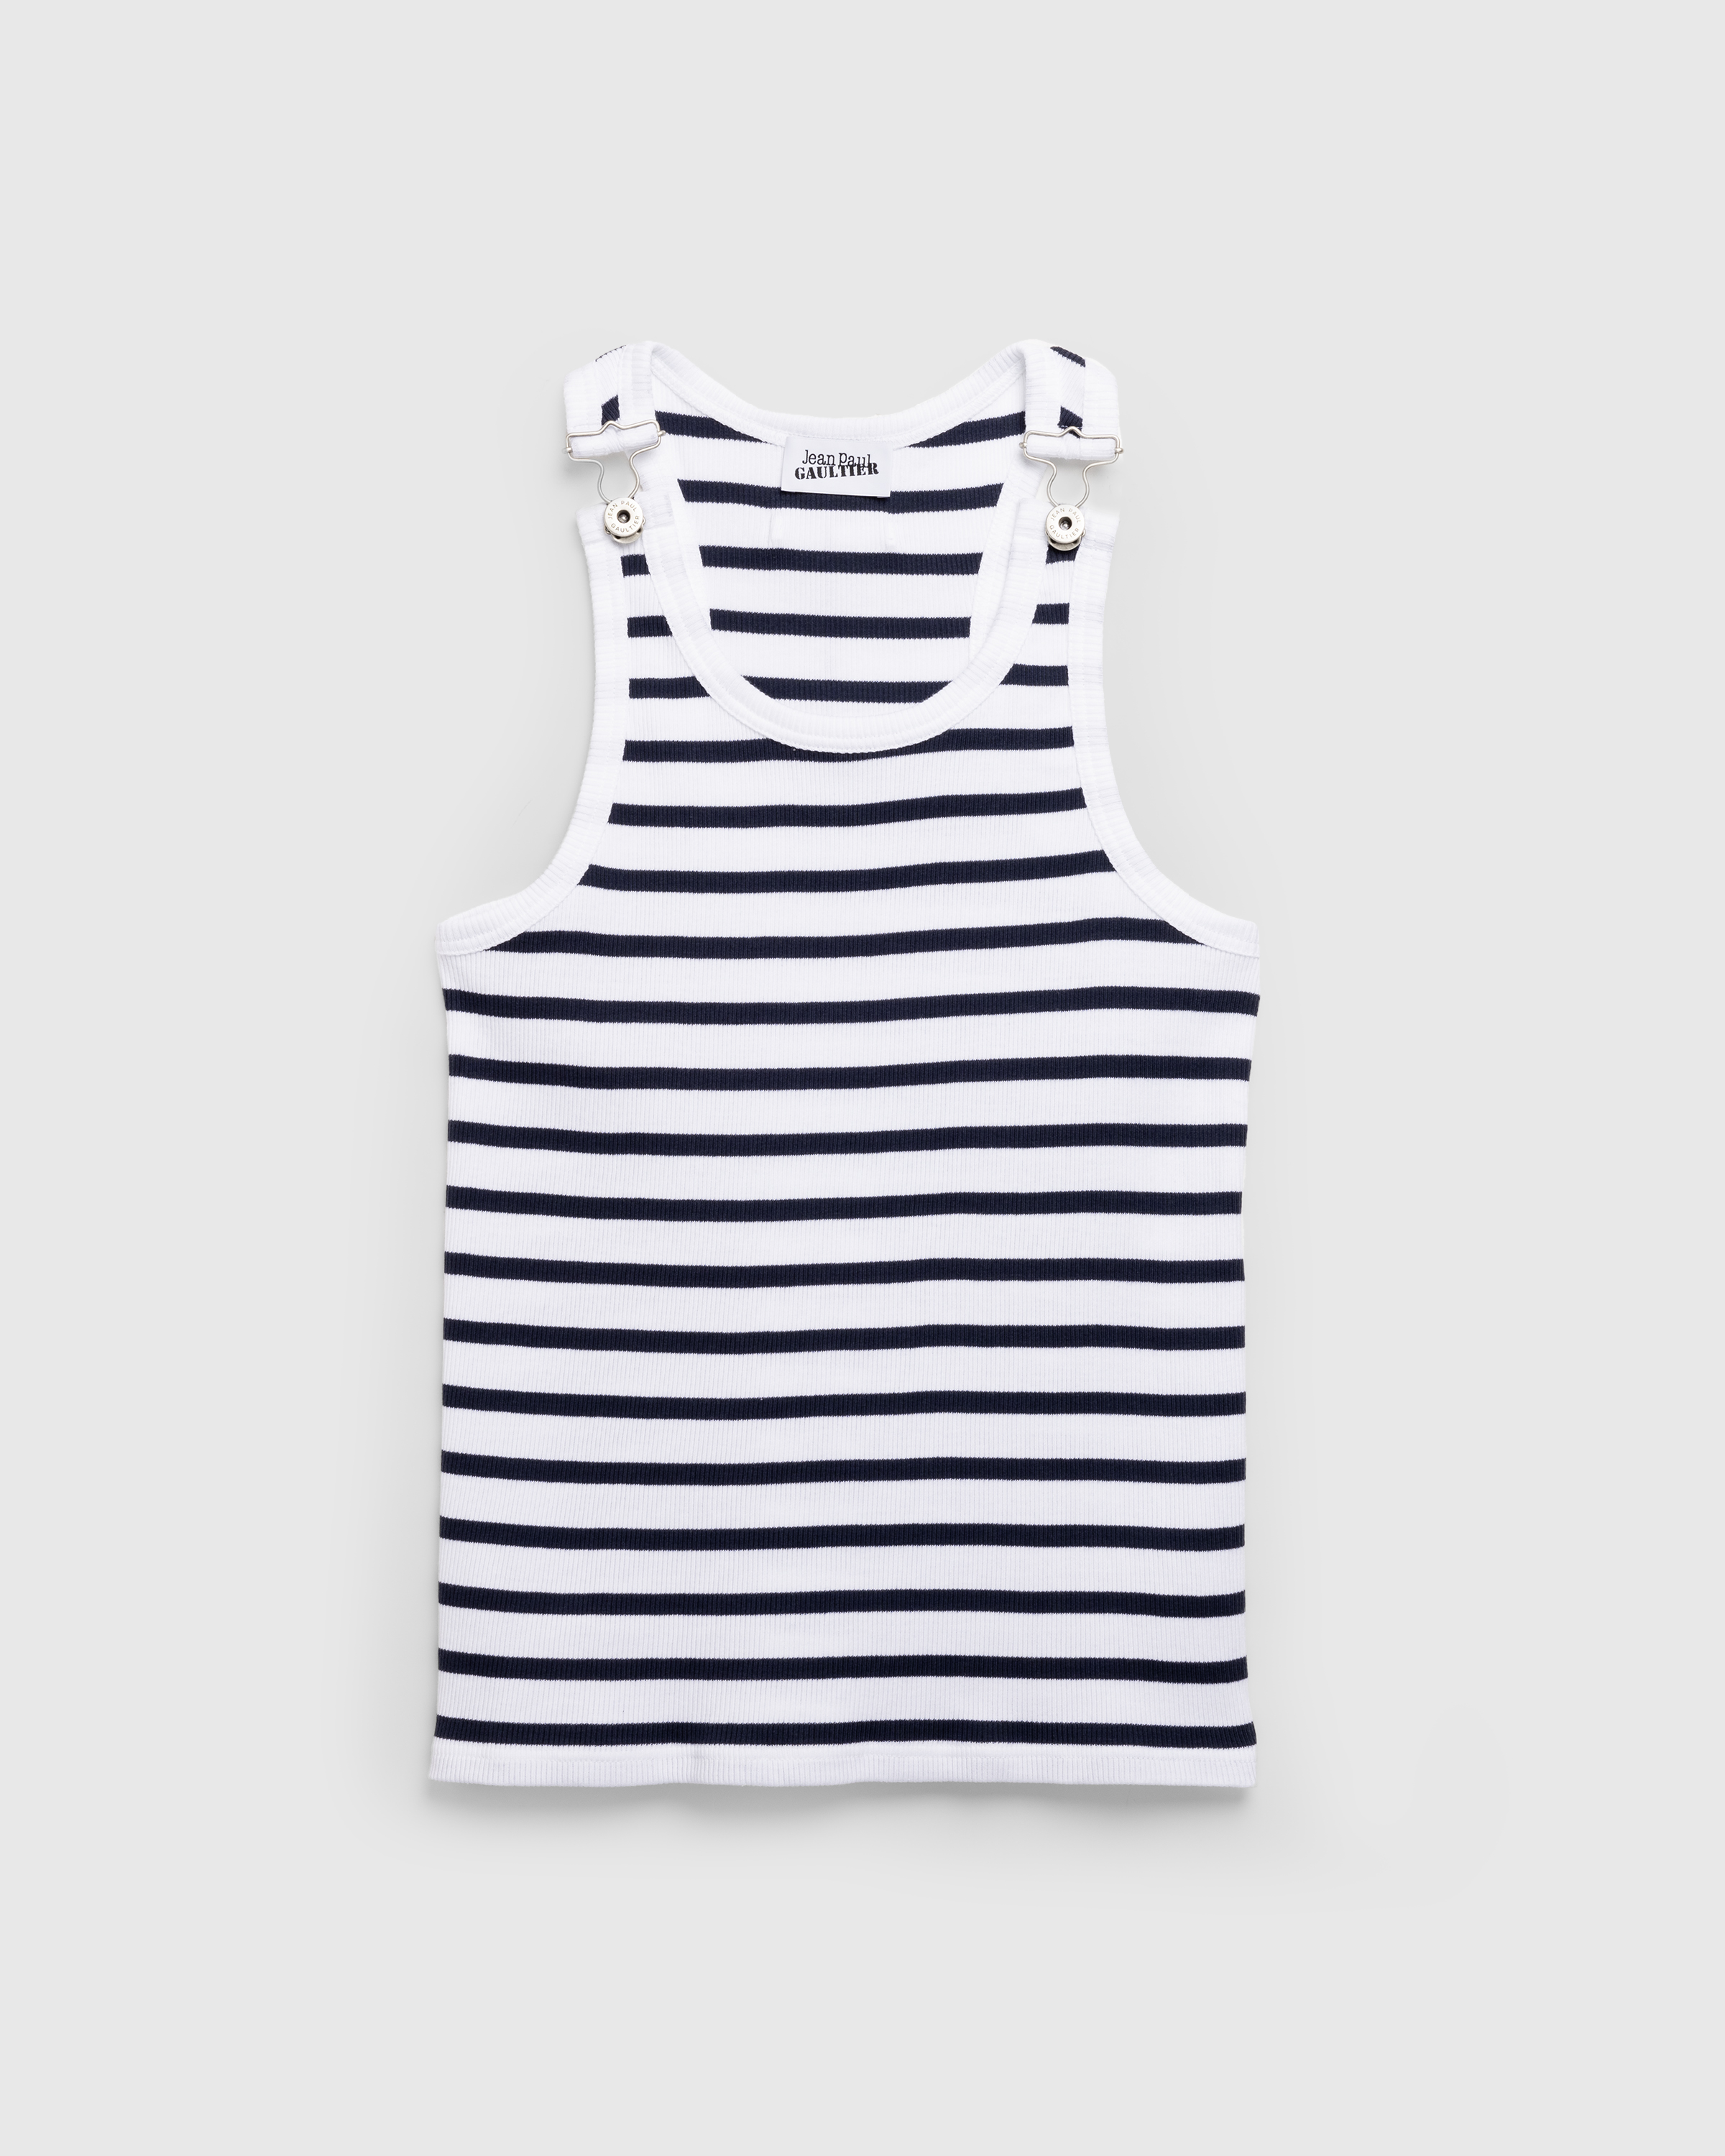 Jean Paul Gaultier – Ribbed Mariniere Tank Top White/Navy - Tank Tops - White - Image 1